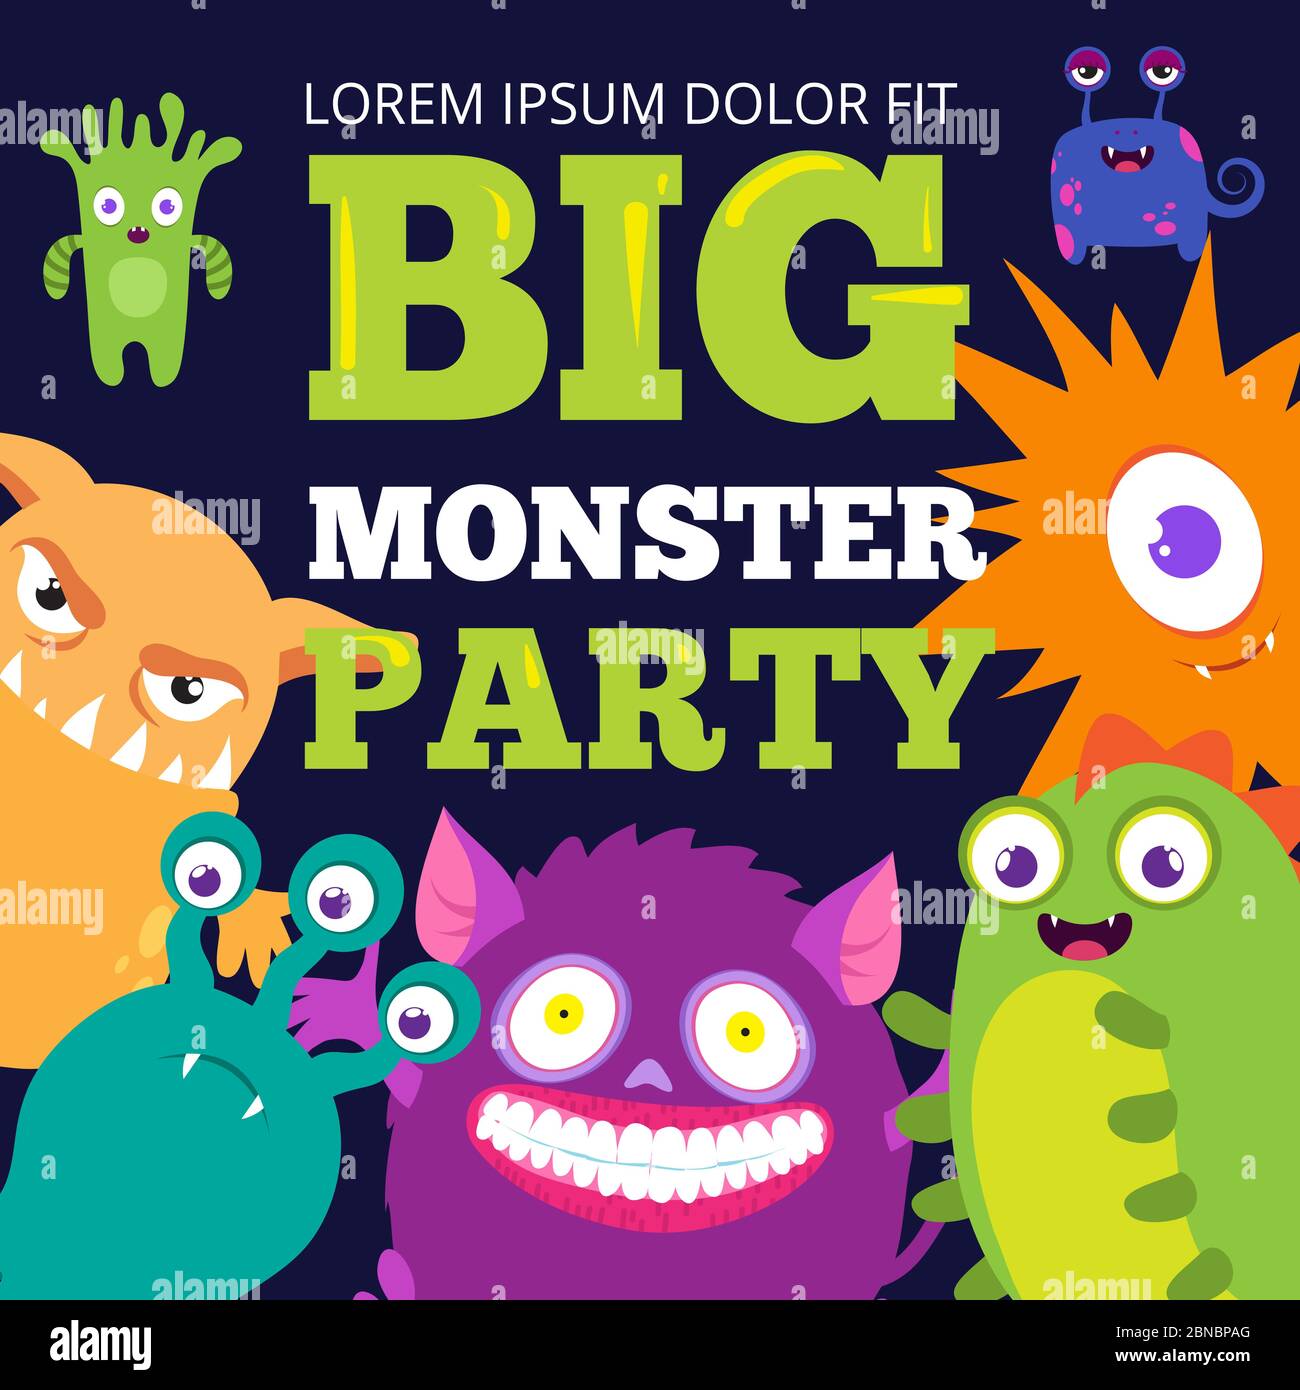 Halloween monster party banner template with cute cartoon characters ...